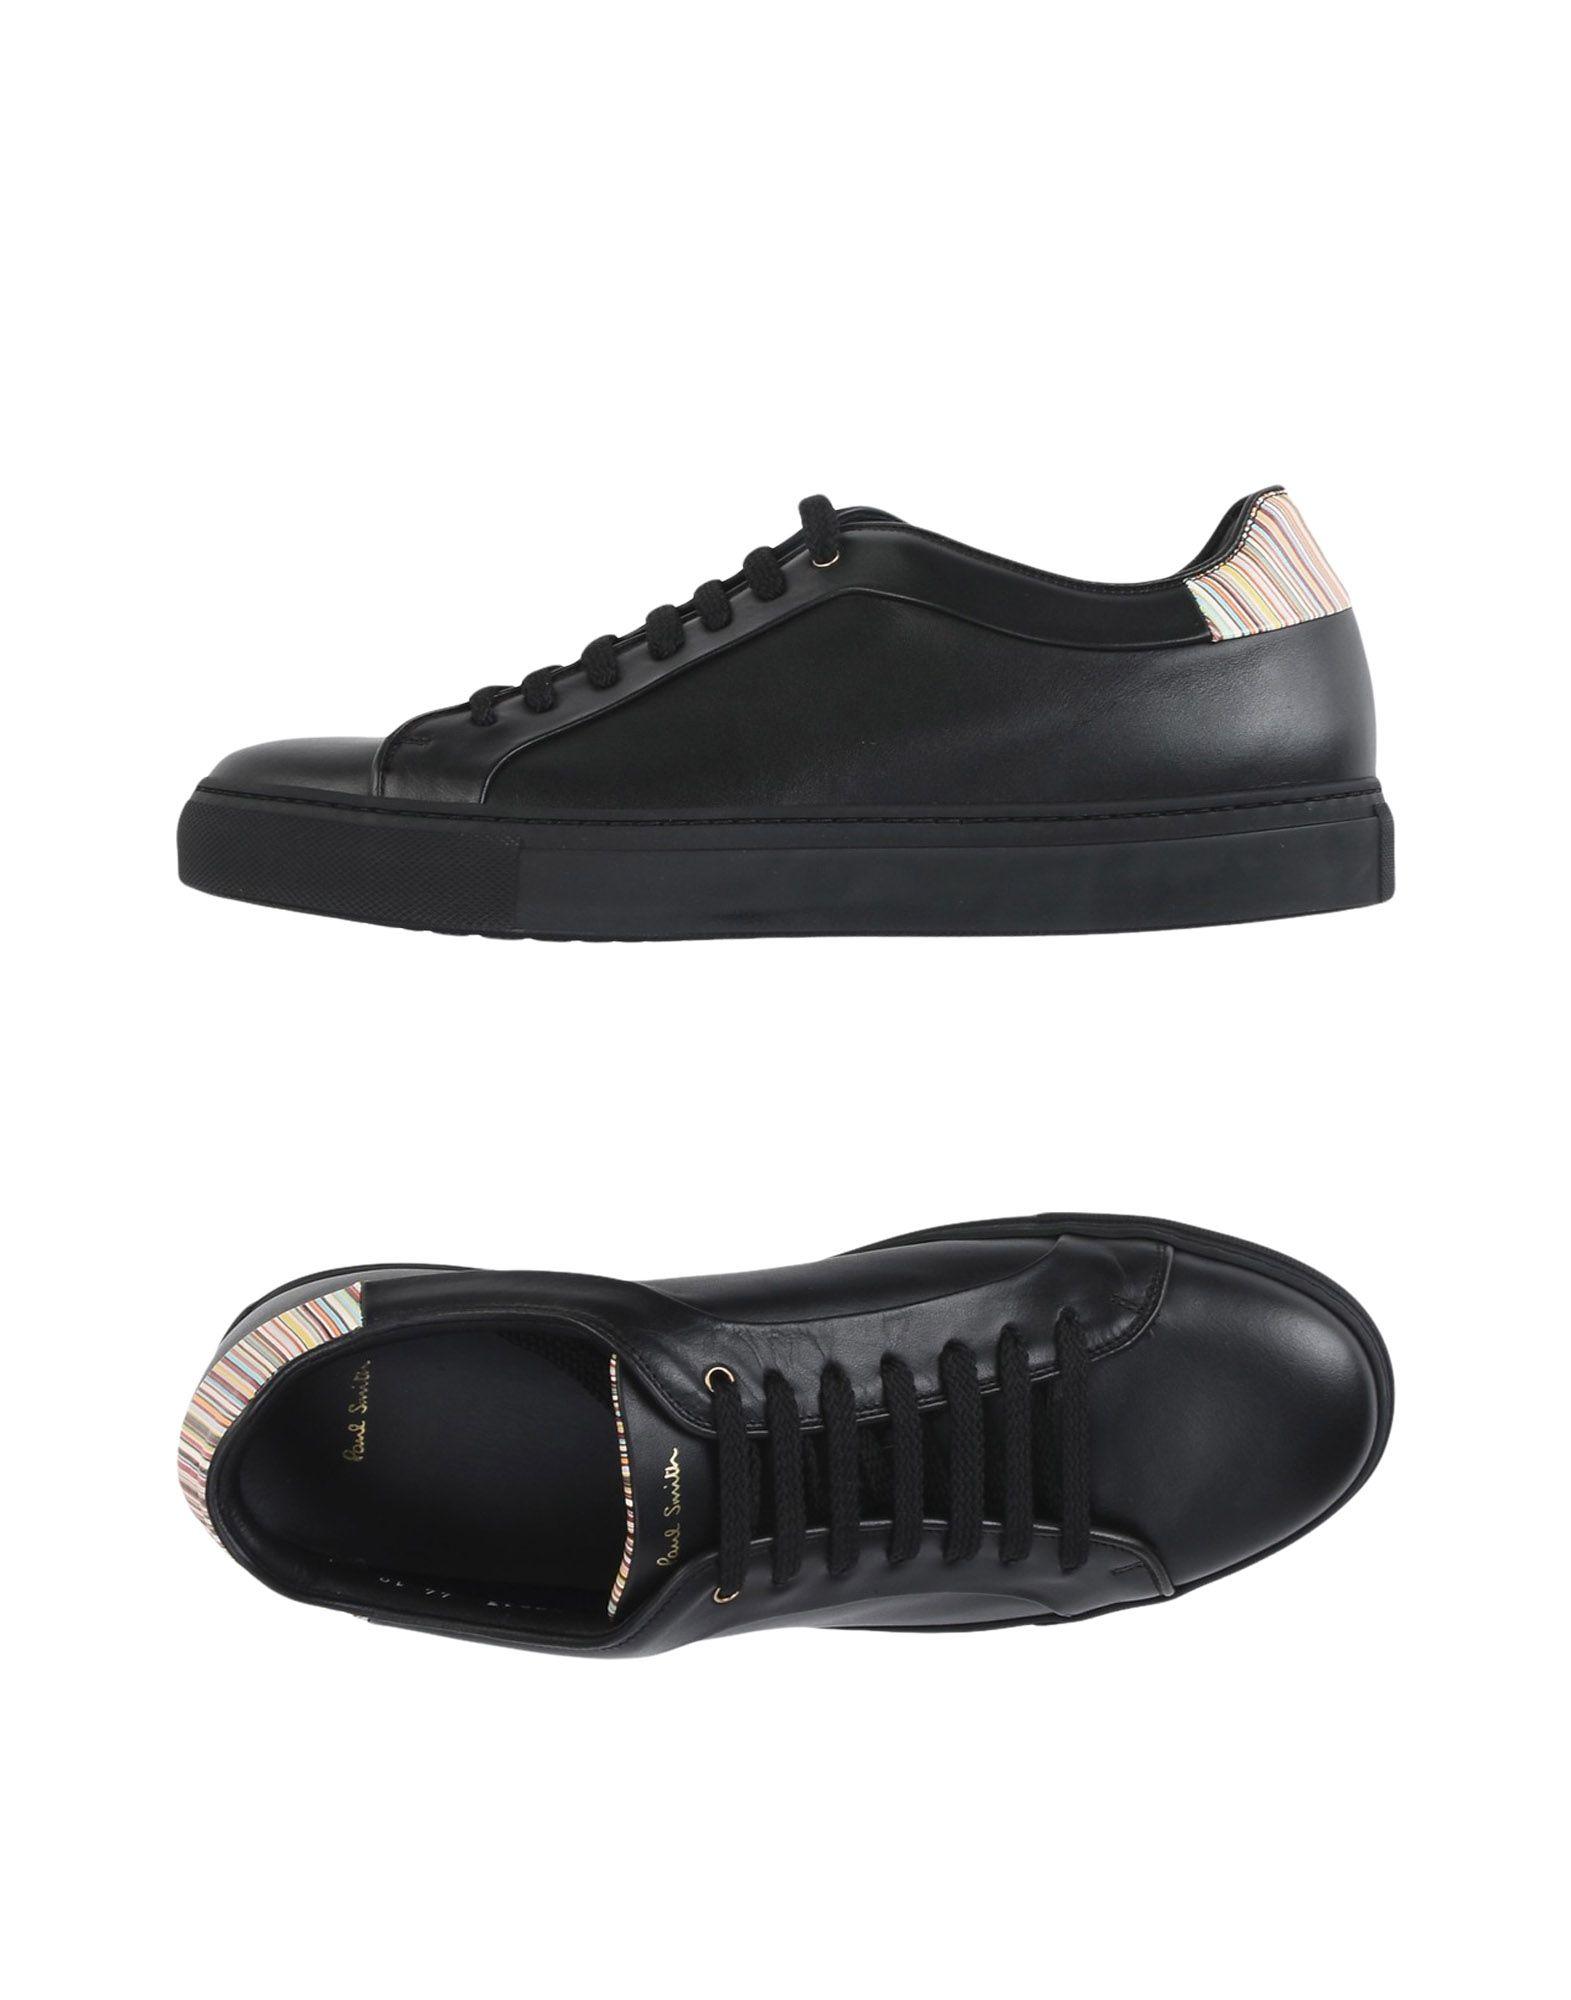 paul smith black trainers